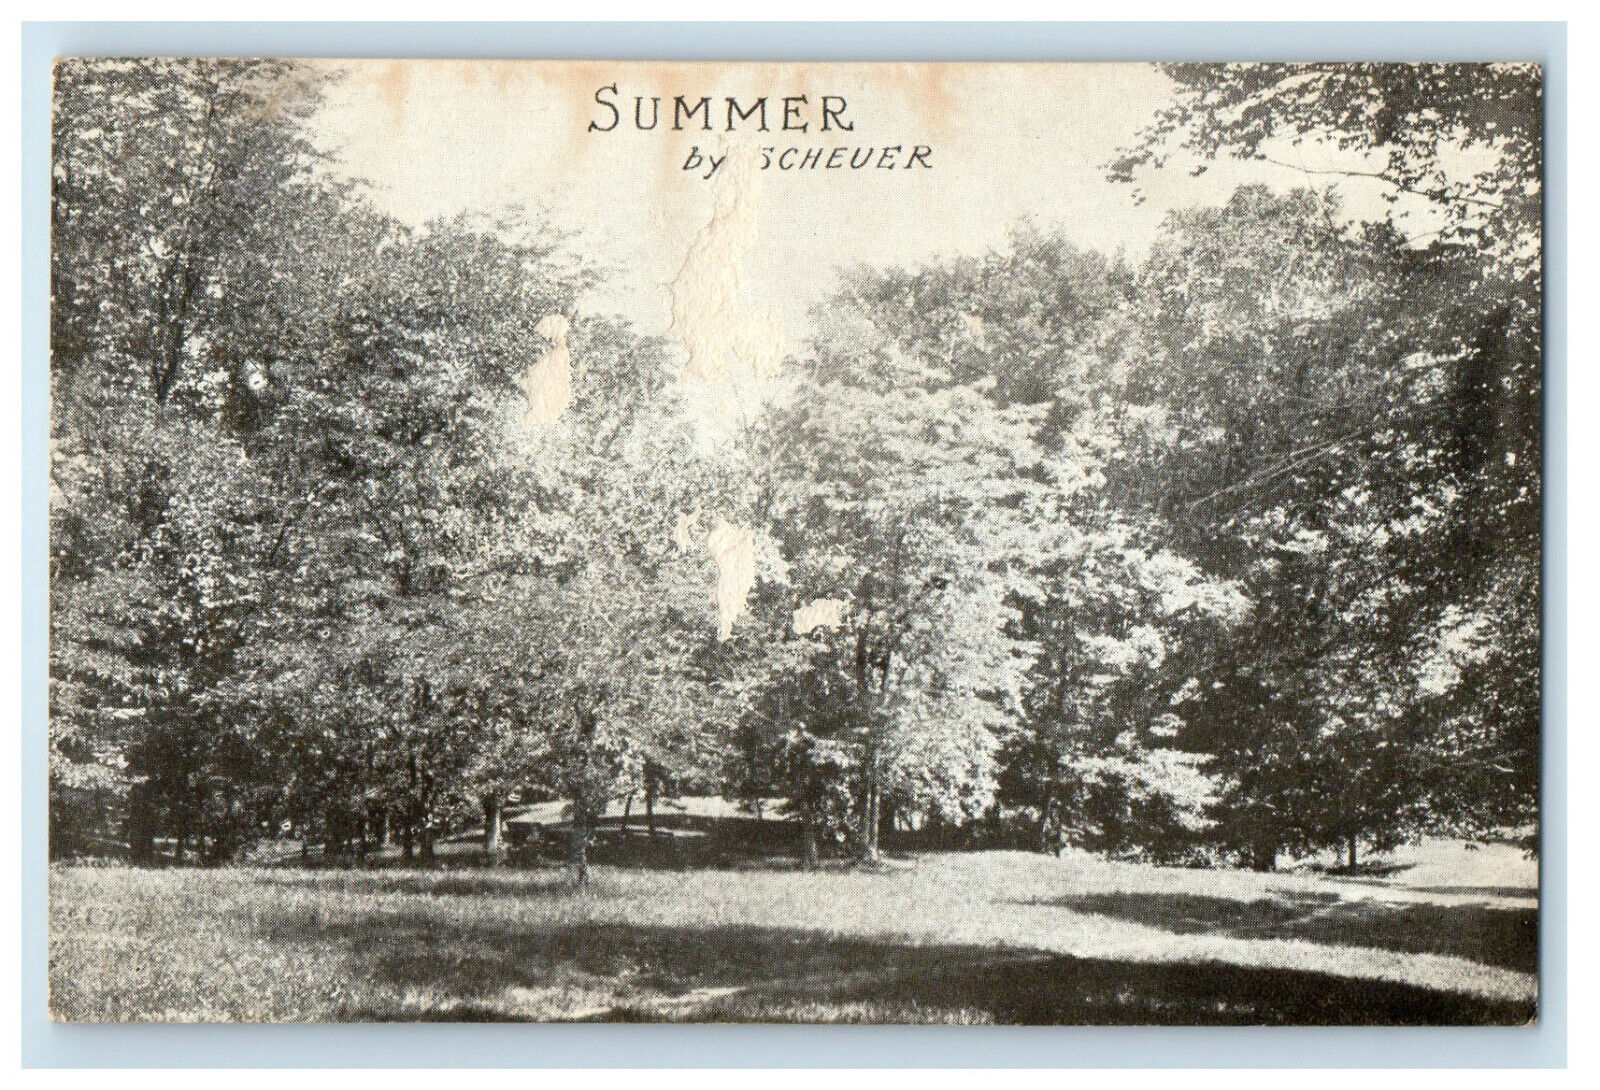 1909 Scene of Nature, Summer By Schever Antique Posted Postcard